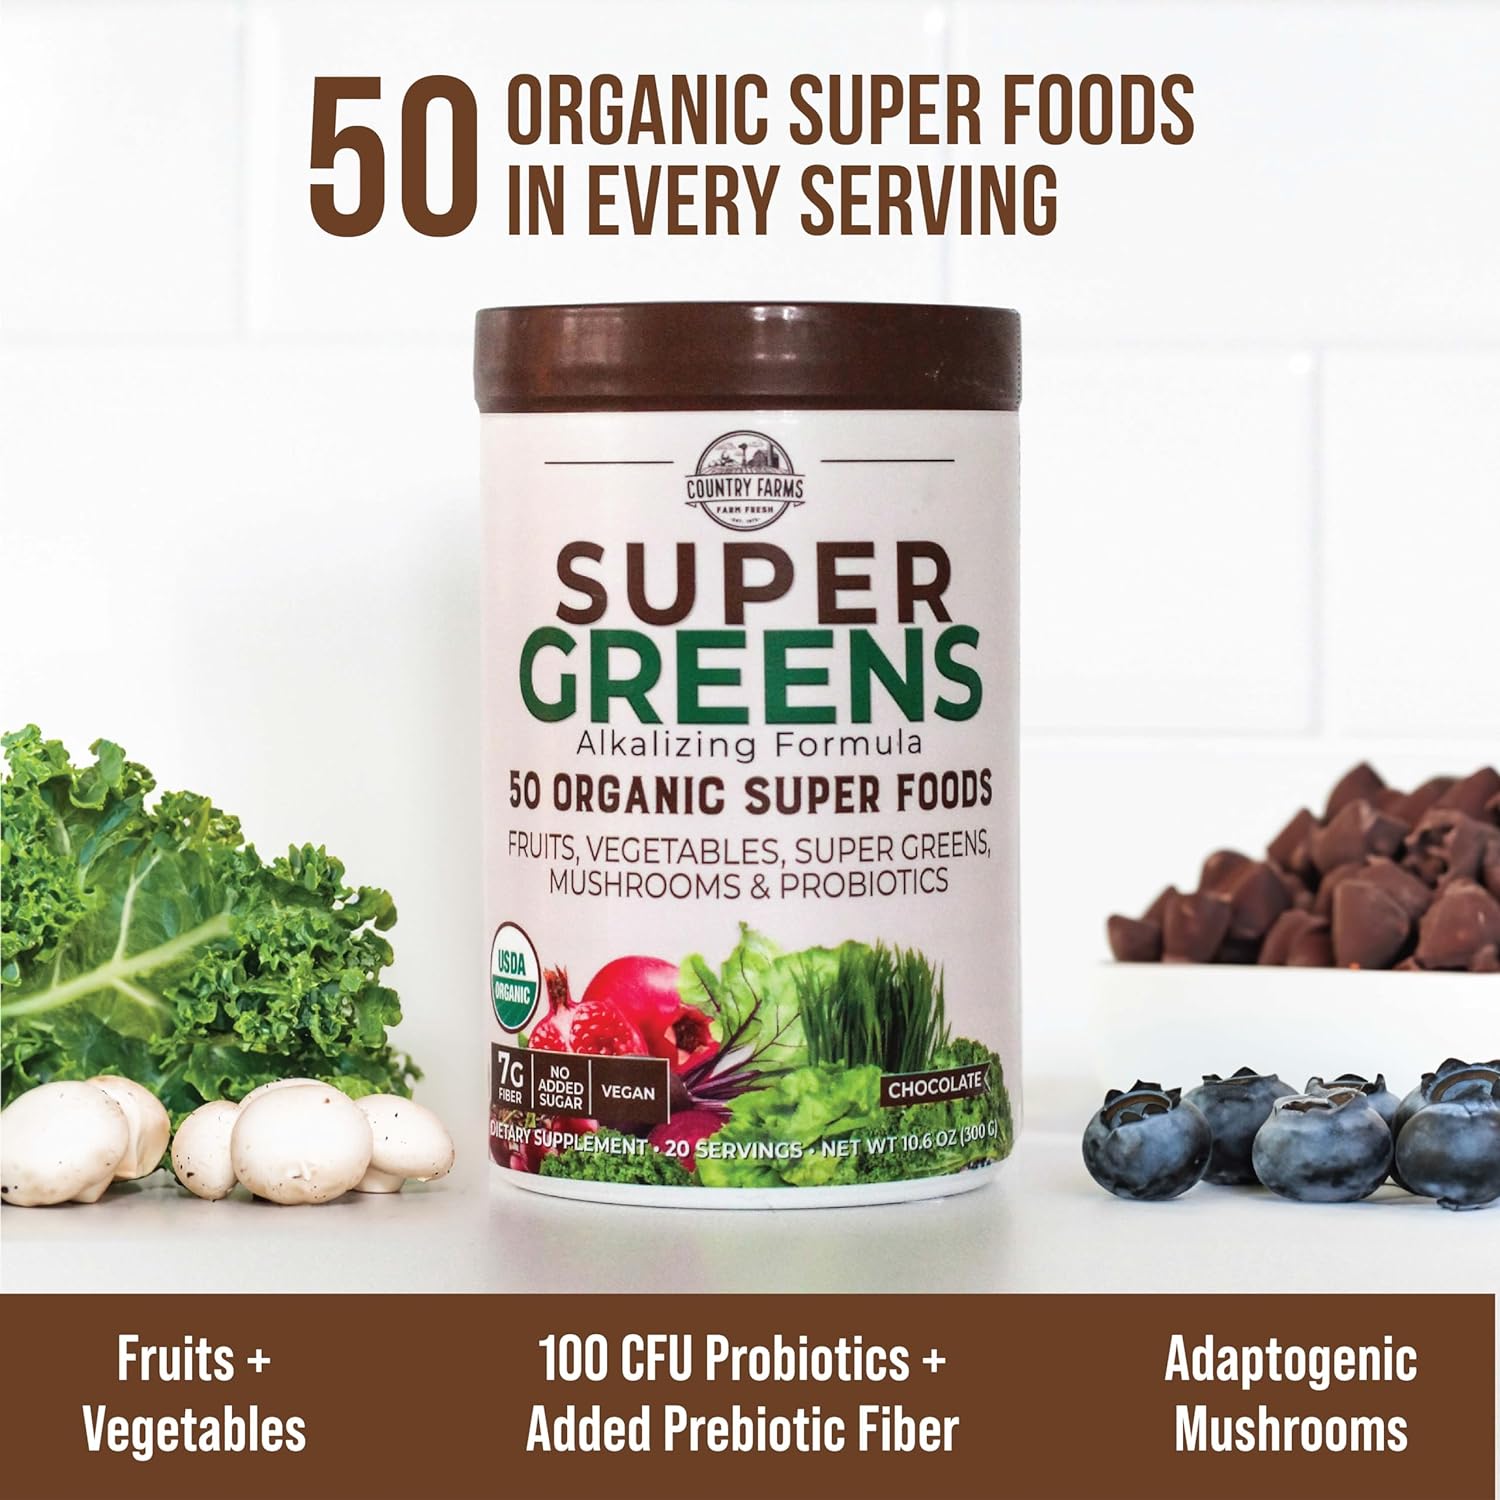 COUNTRY FARMS Super Greens Chocolate Flavor, 50 Organic Super Foods, USDA Organic Drink Mix, Fruits, Vegetables, Super Greens, Mushrooms & Probiotics, Supports Energy, 20 Servings, 10.6 Oz : Everything Else